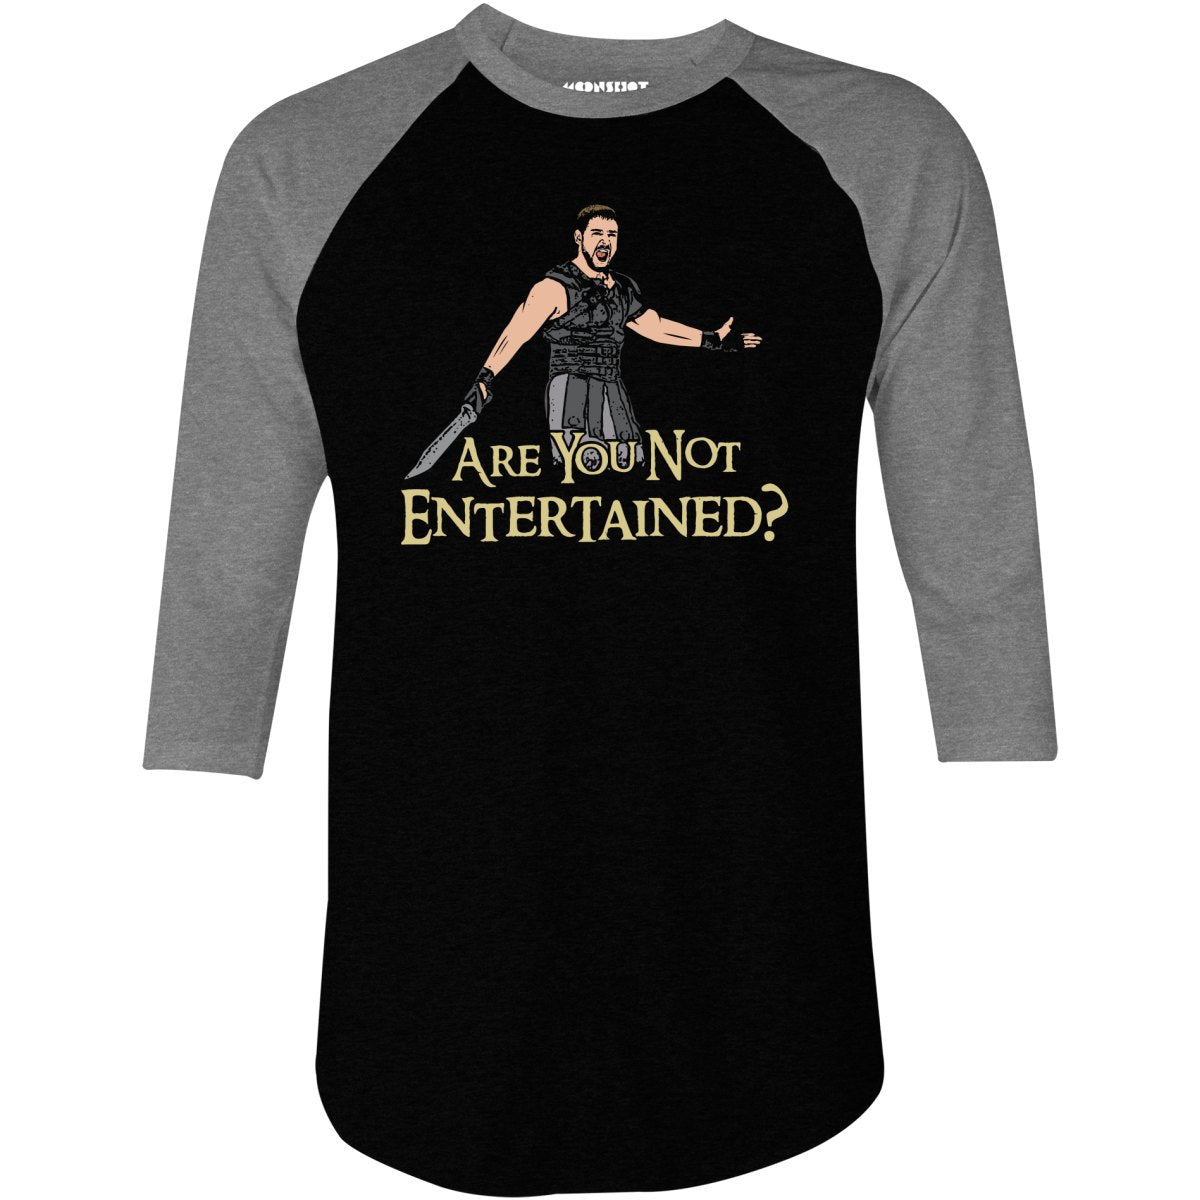 Are You Not Entertained? - 3/4 Sleeve Raglan T-Shirt